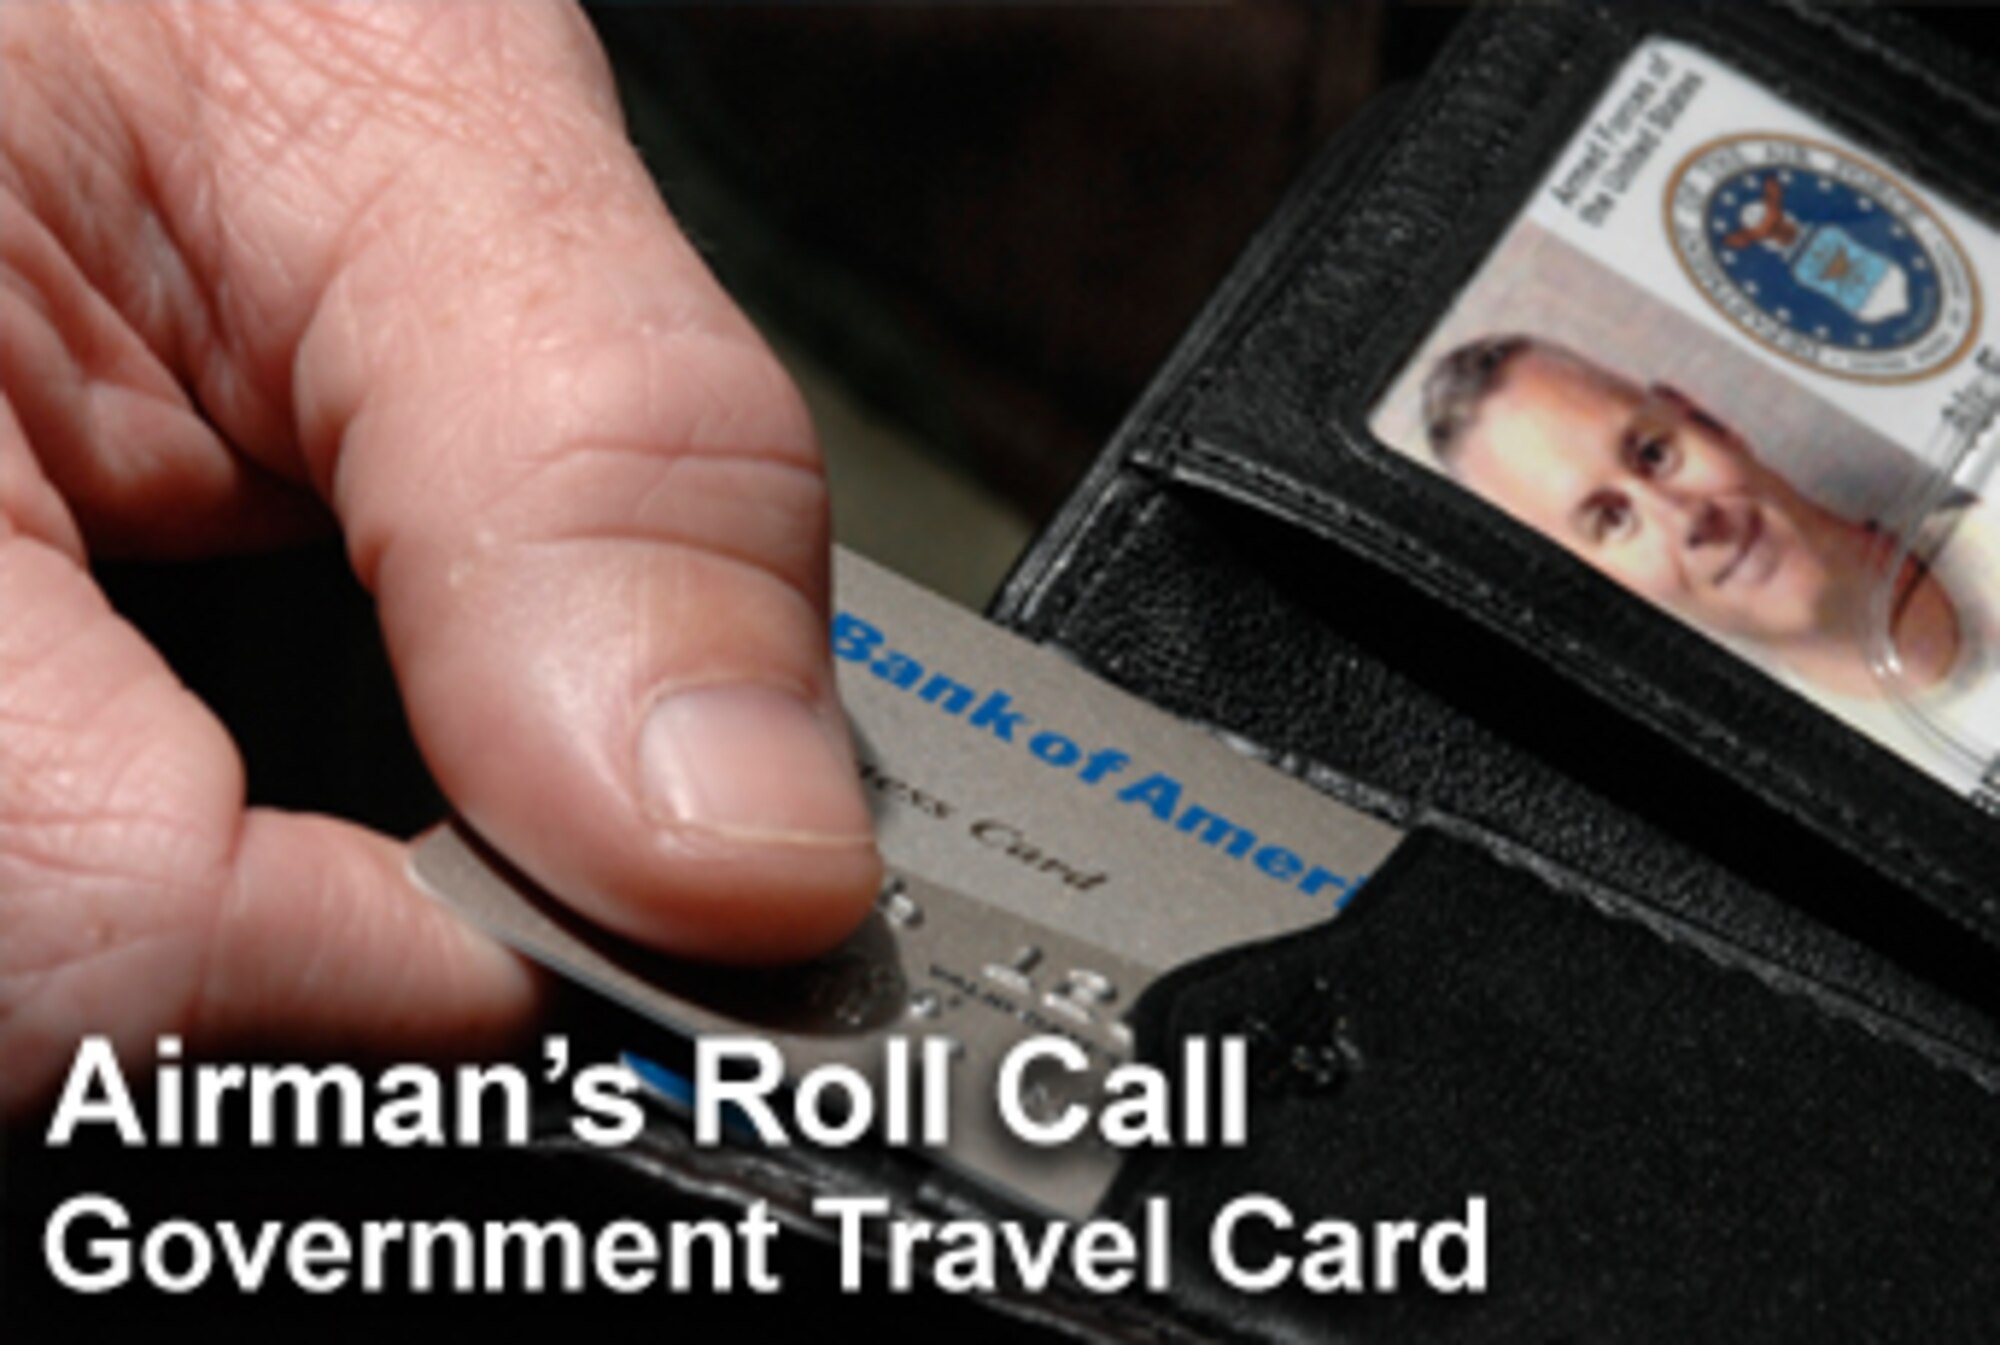 This week's Airman's Roll Call focuses on the government travel card, a benefit available to Department of Defense employees with the understanding it will not be abused or misused in any way. (U.S. Air Force photo illustration/Staff Sgt. Brian Ferguson)
